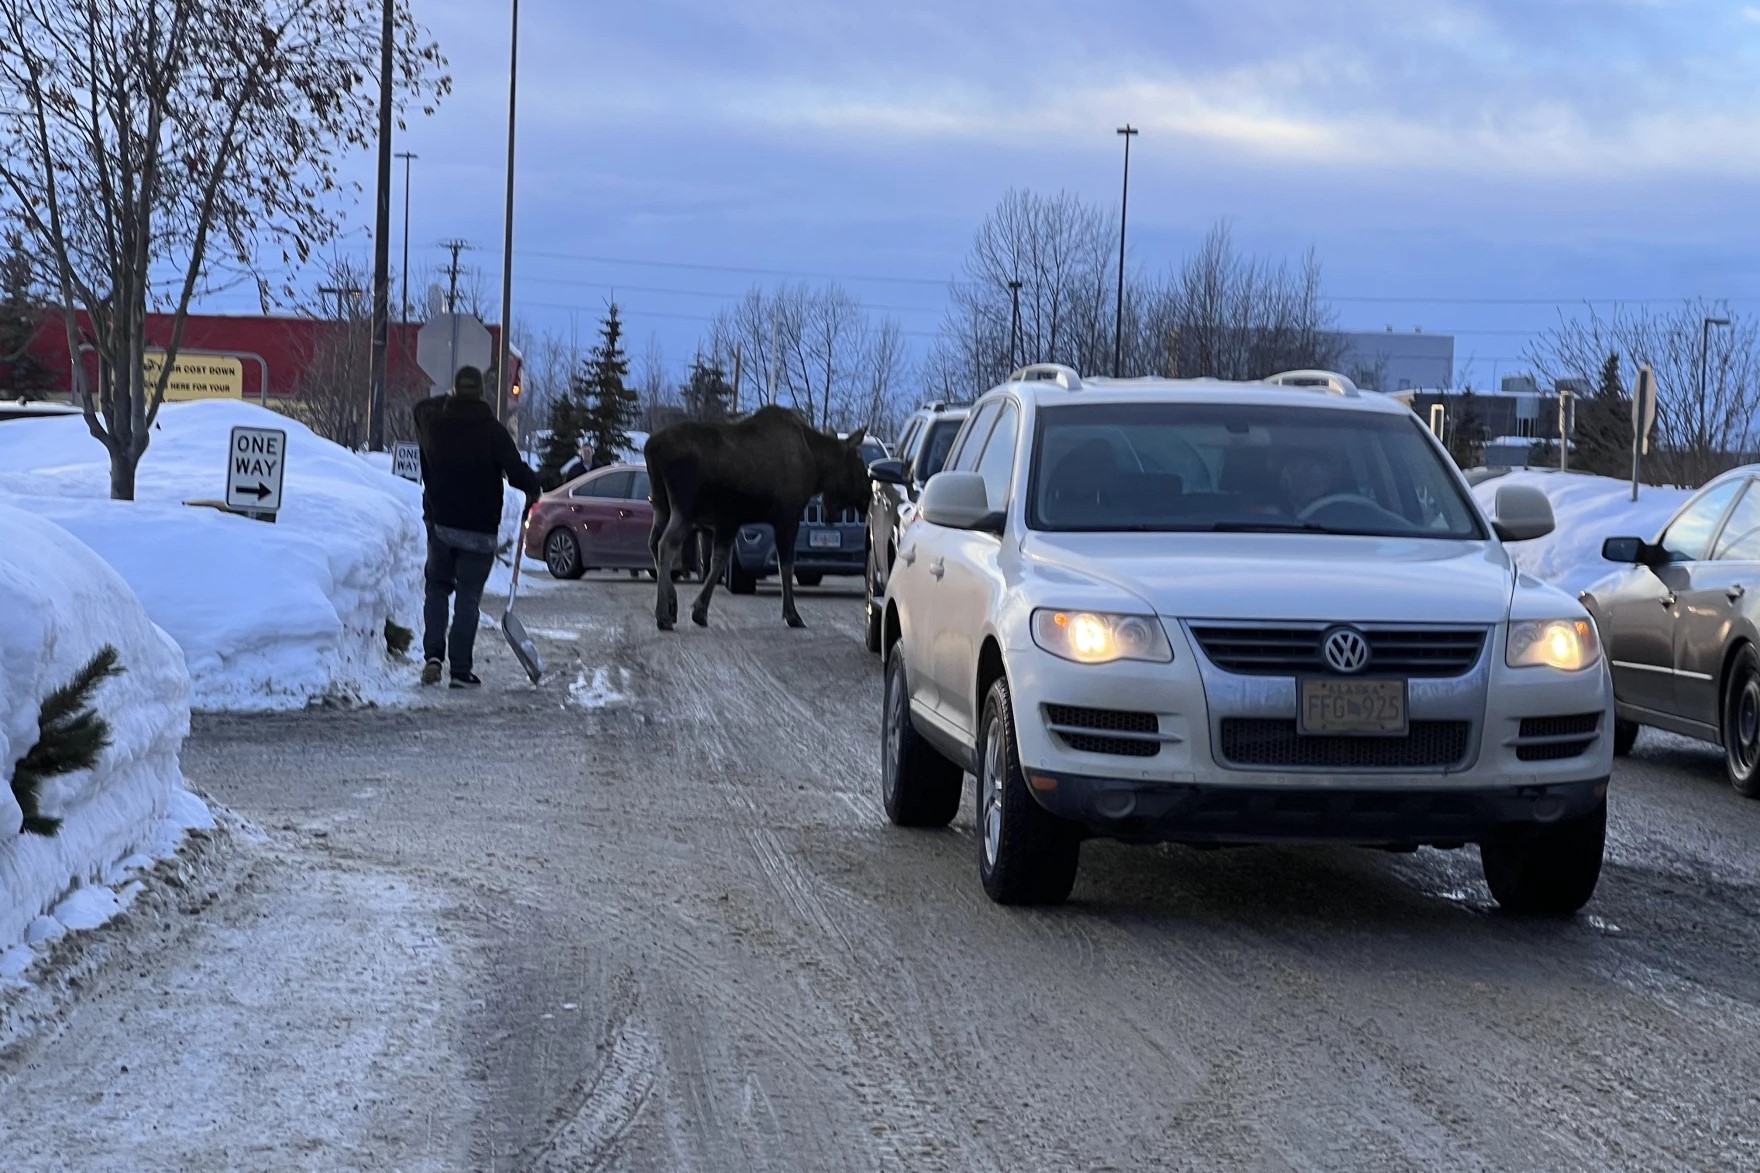 a moose stands near cars